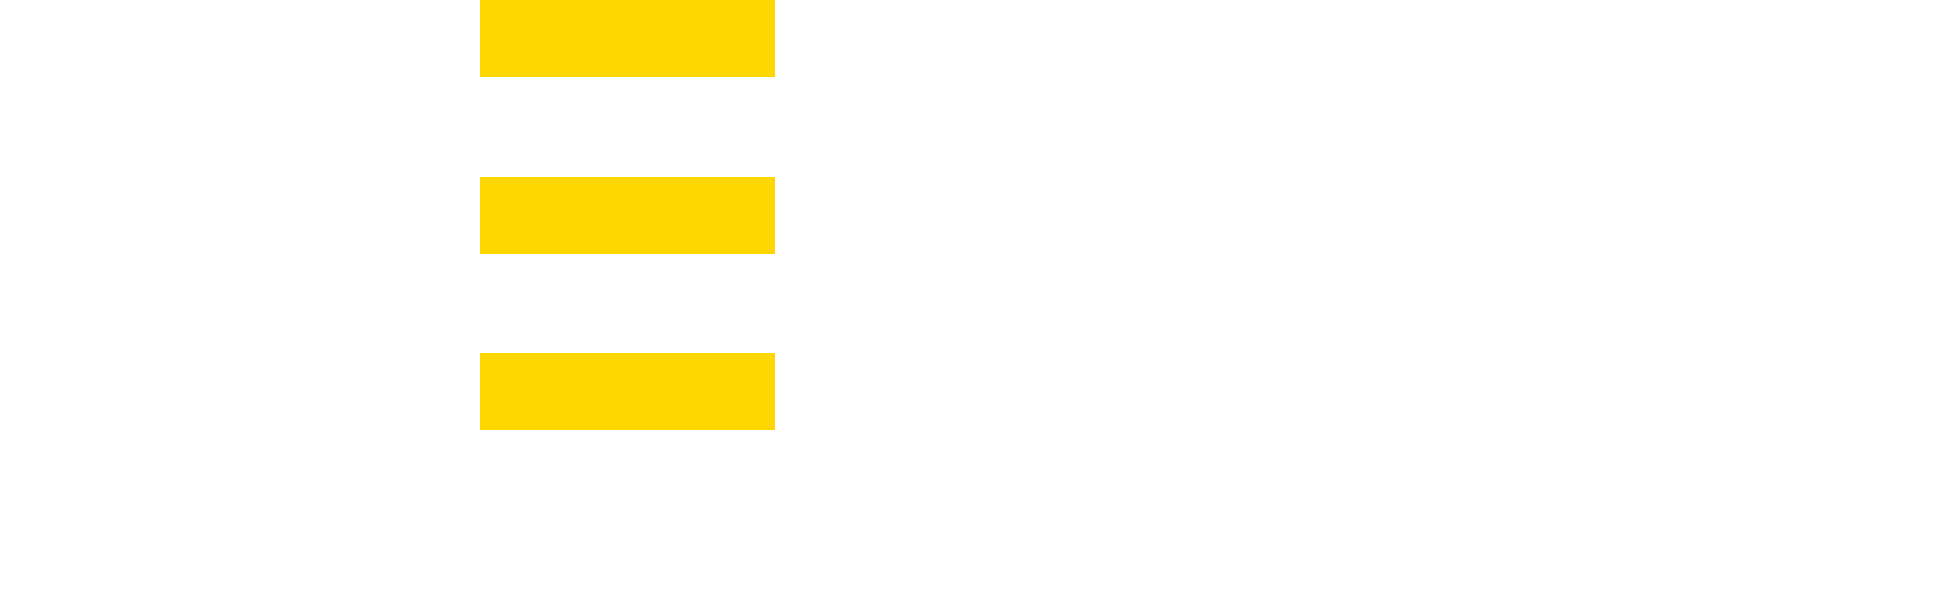 WE LIFT IN A SOCIETY (@weliftinasociety) Website Logo - Reject your Humanity